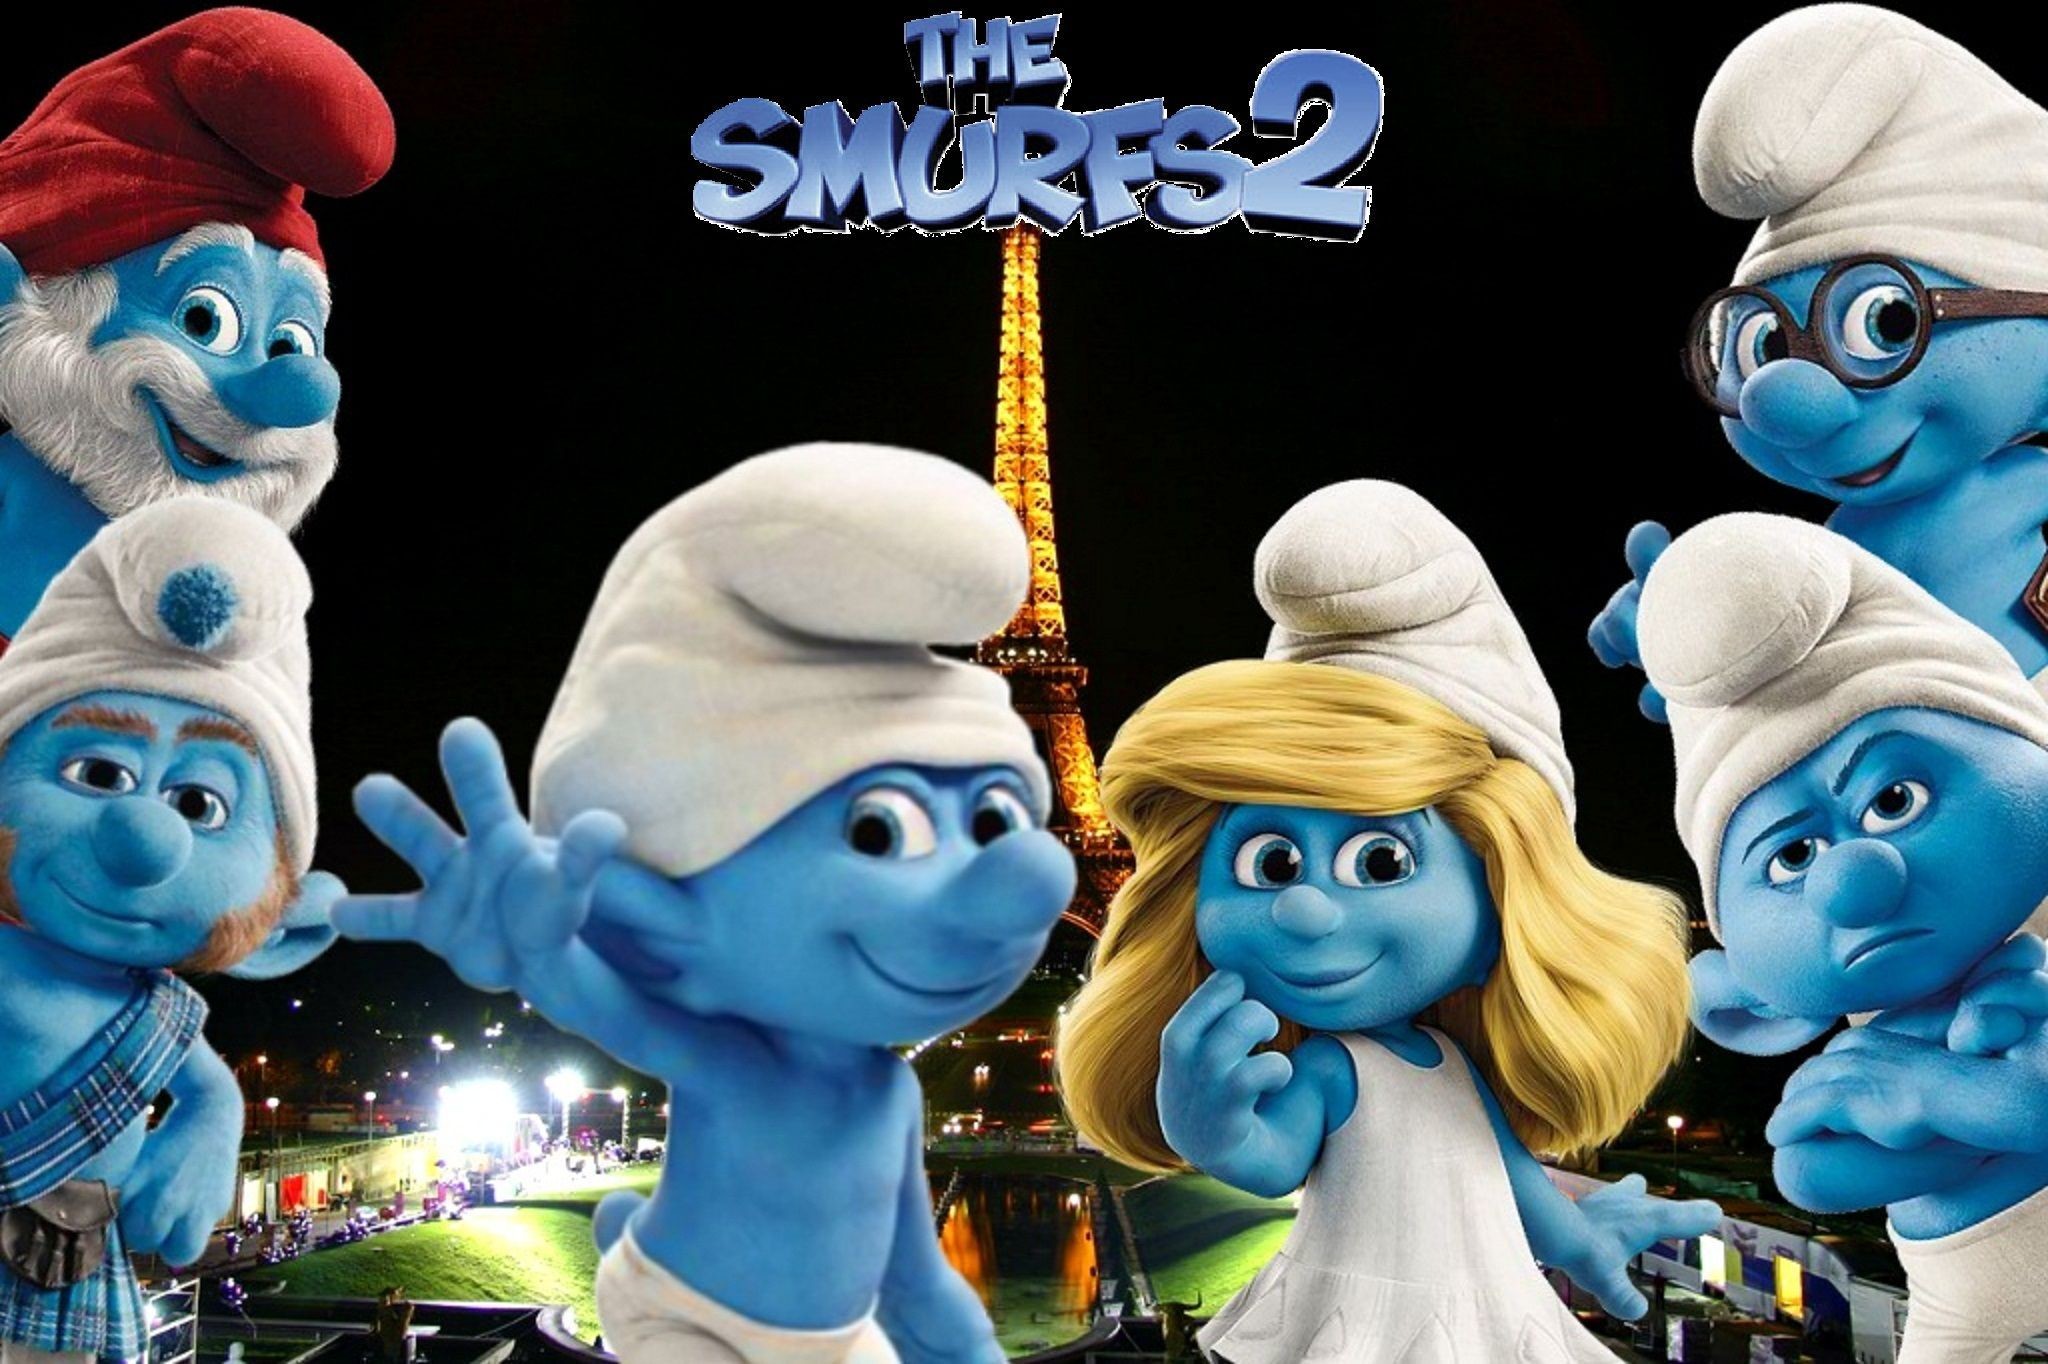 2048x1364 The Smurfs Wallpapers - Wallpaper Cave.